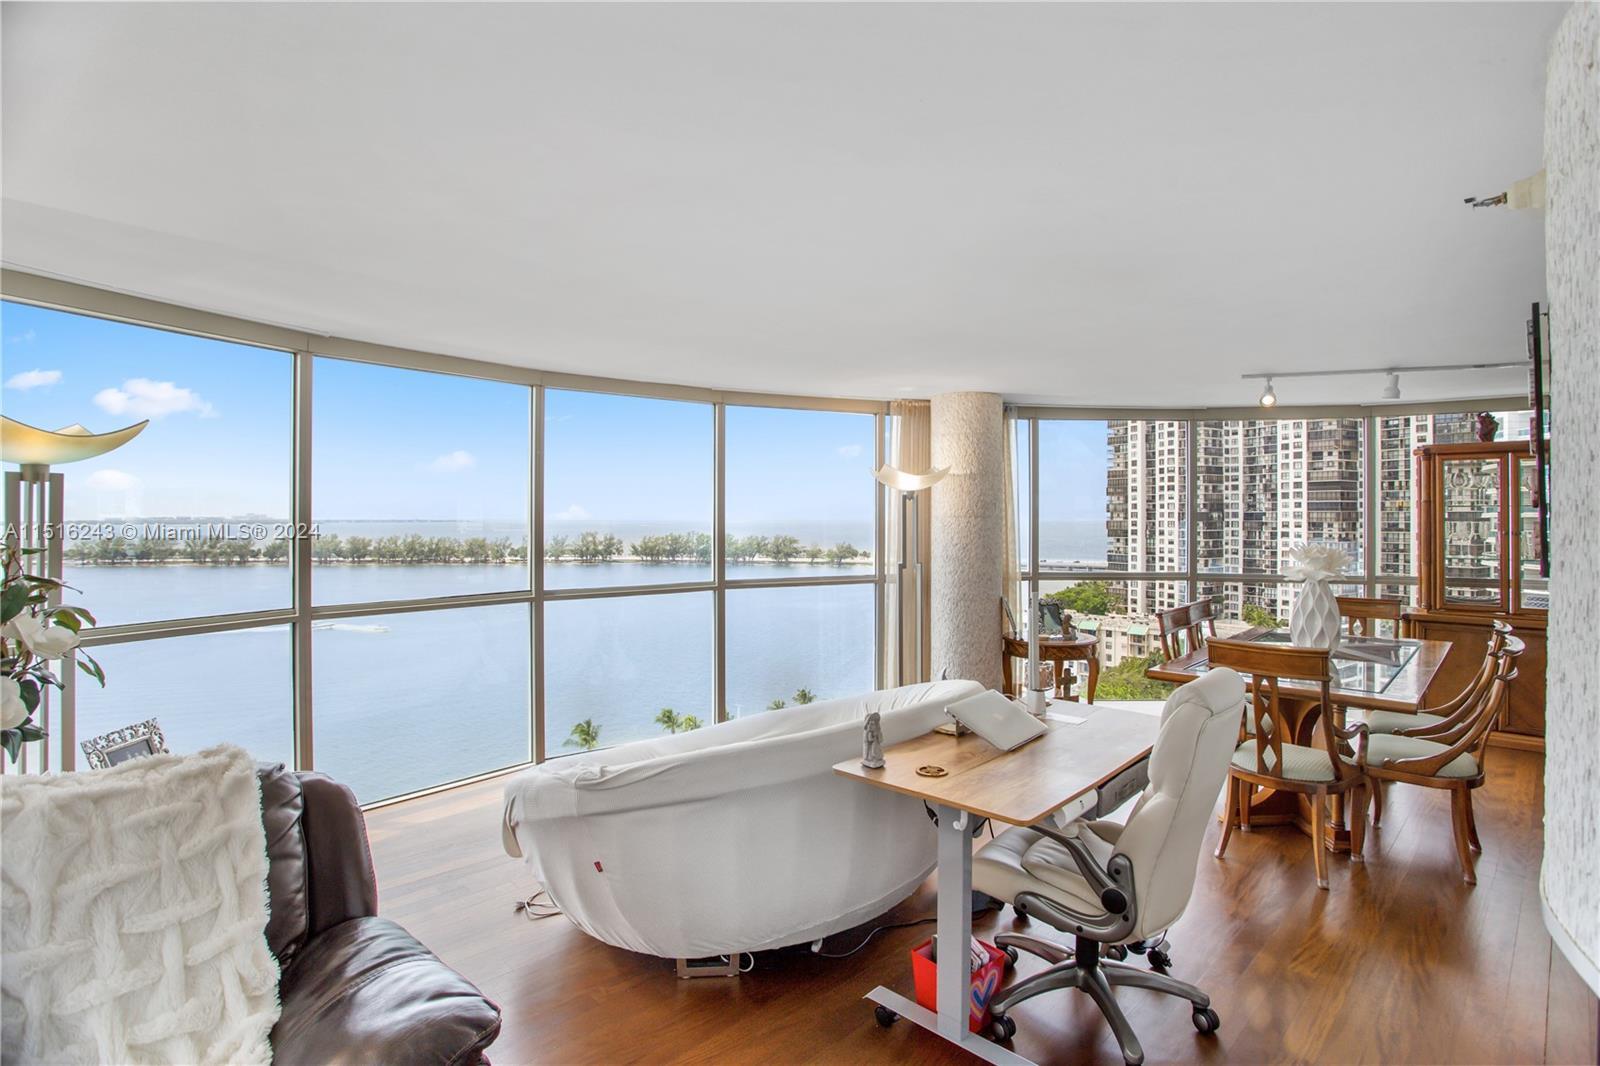 Prepare to be mesmerized by breathtaking 180-degree views of Biscayne Bay, visible through stunning 